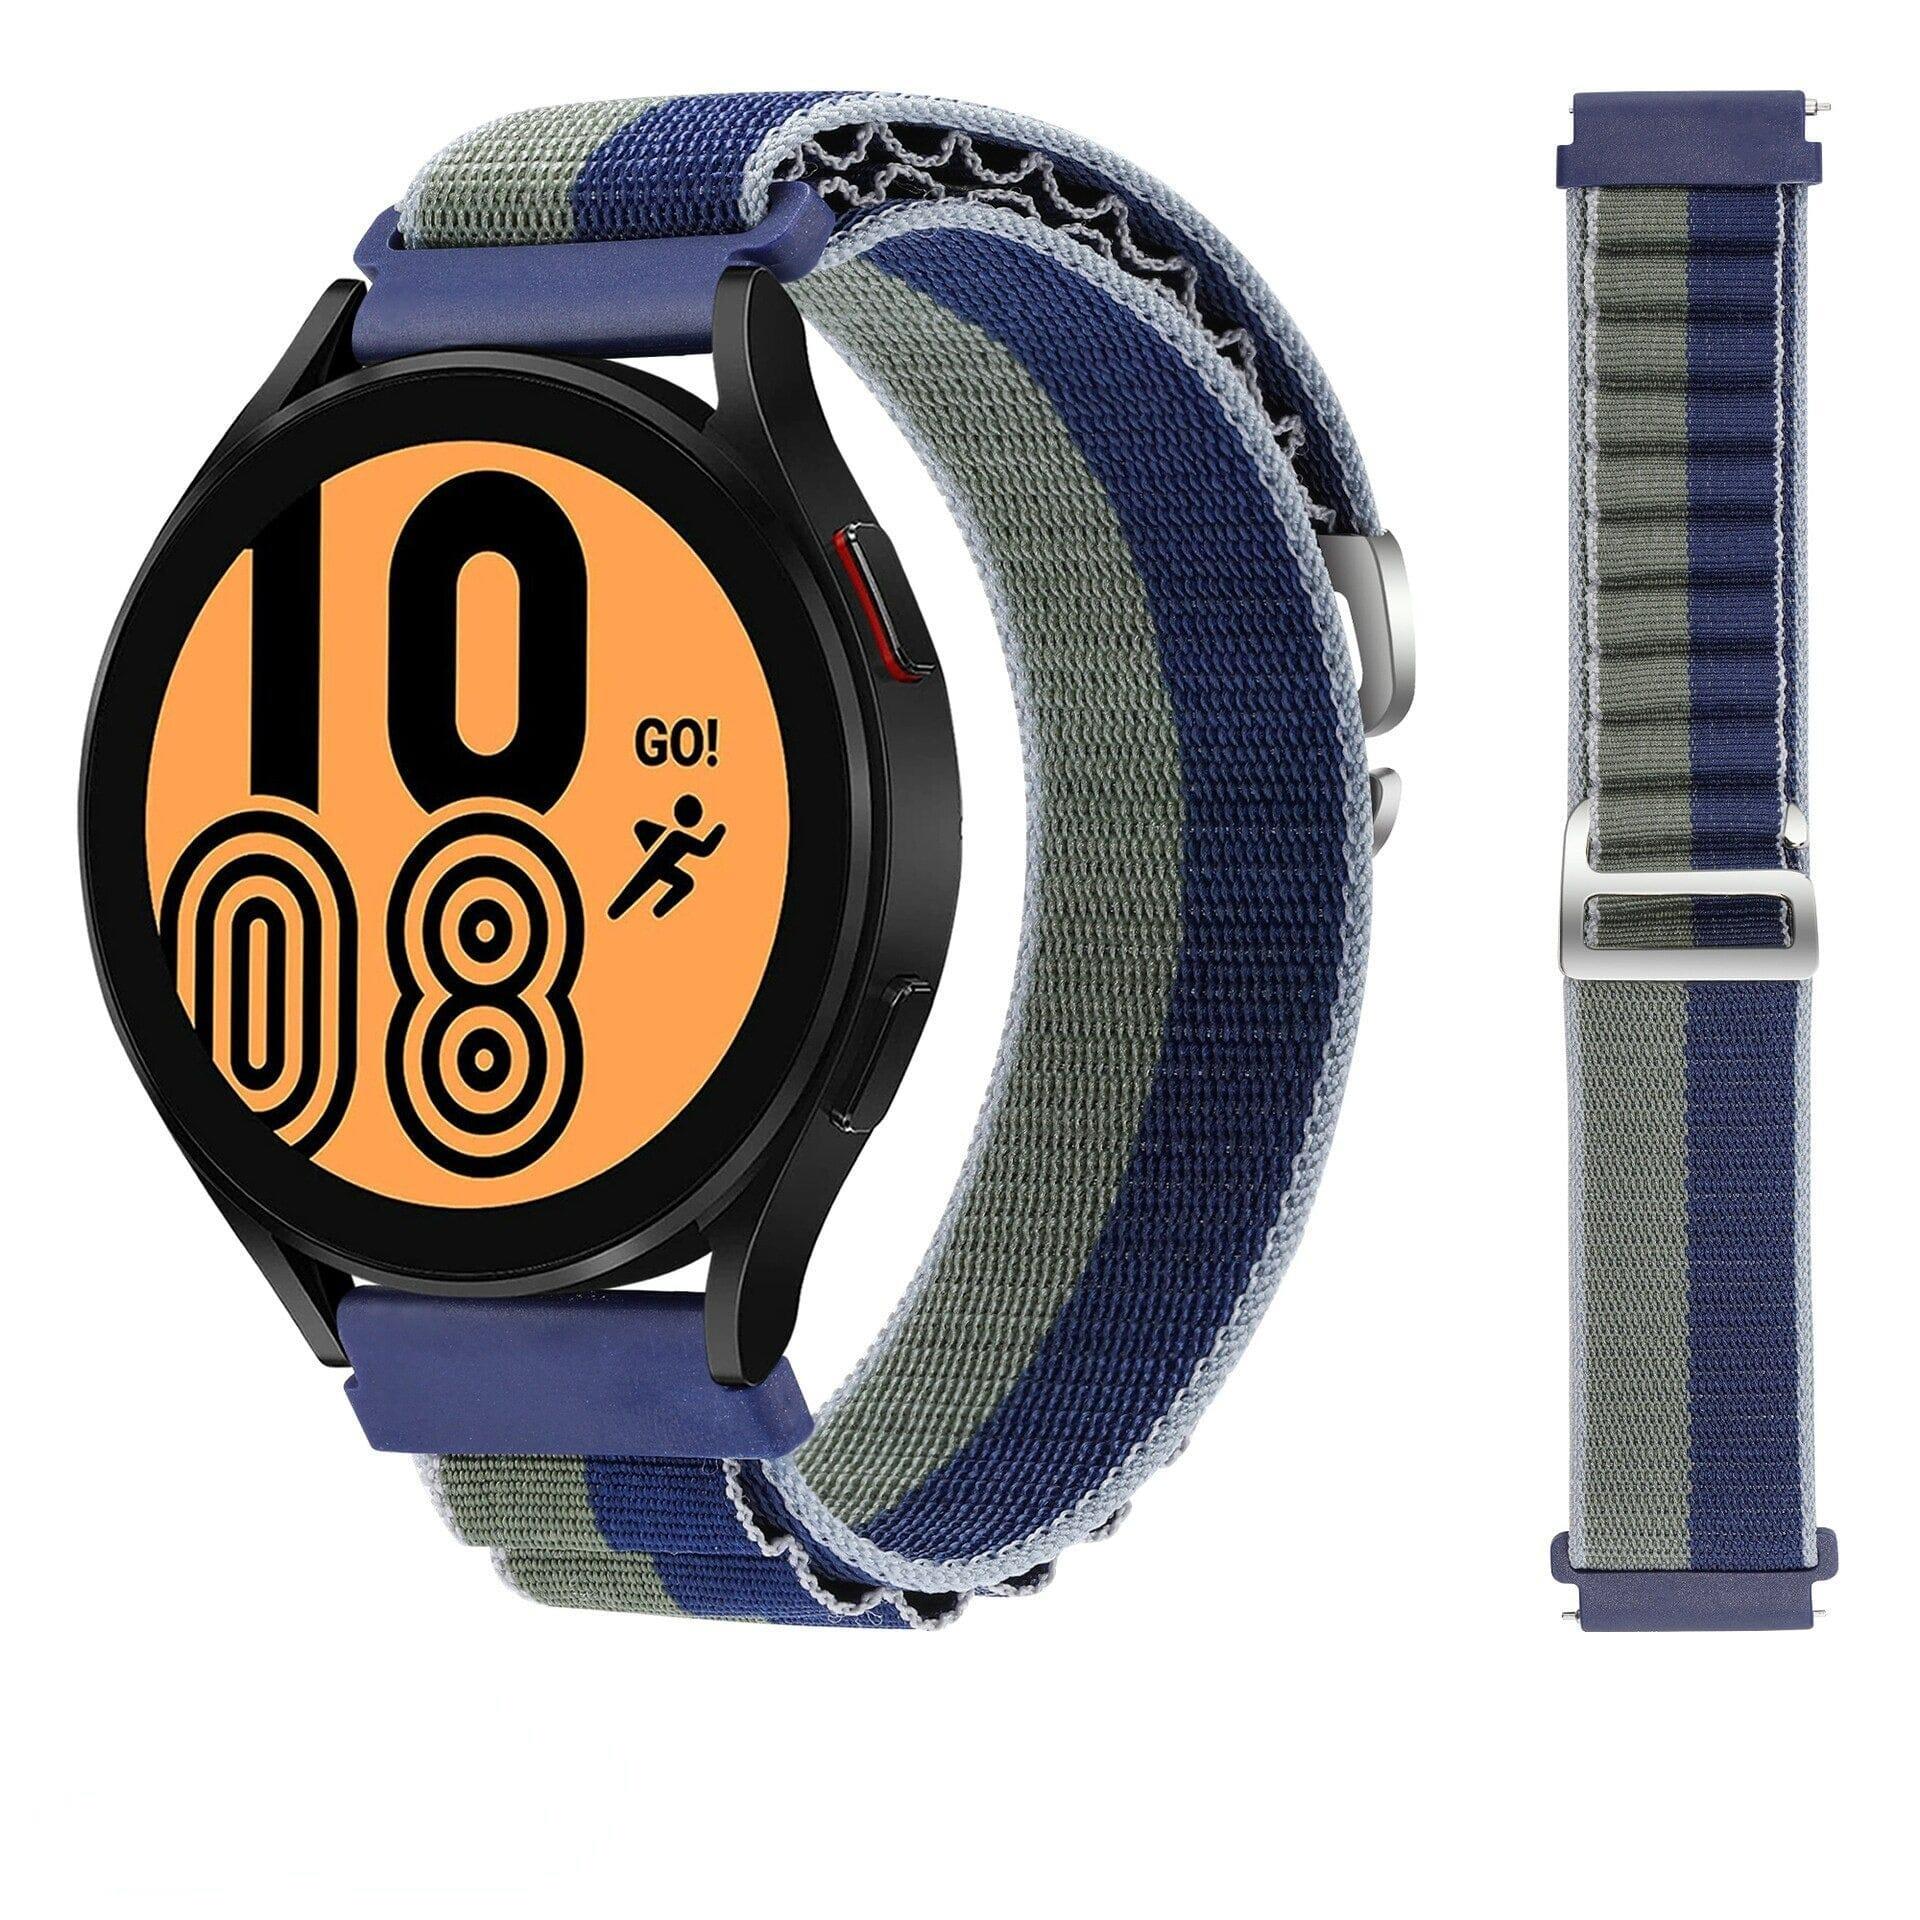 Alpine Loop Watch Straps Compatible with the Wenger 22mm Range